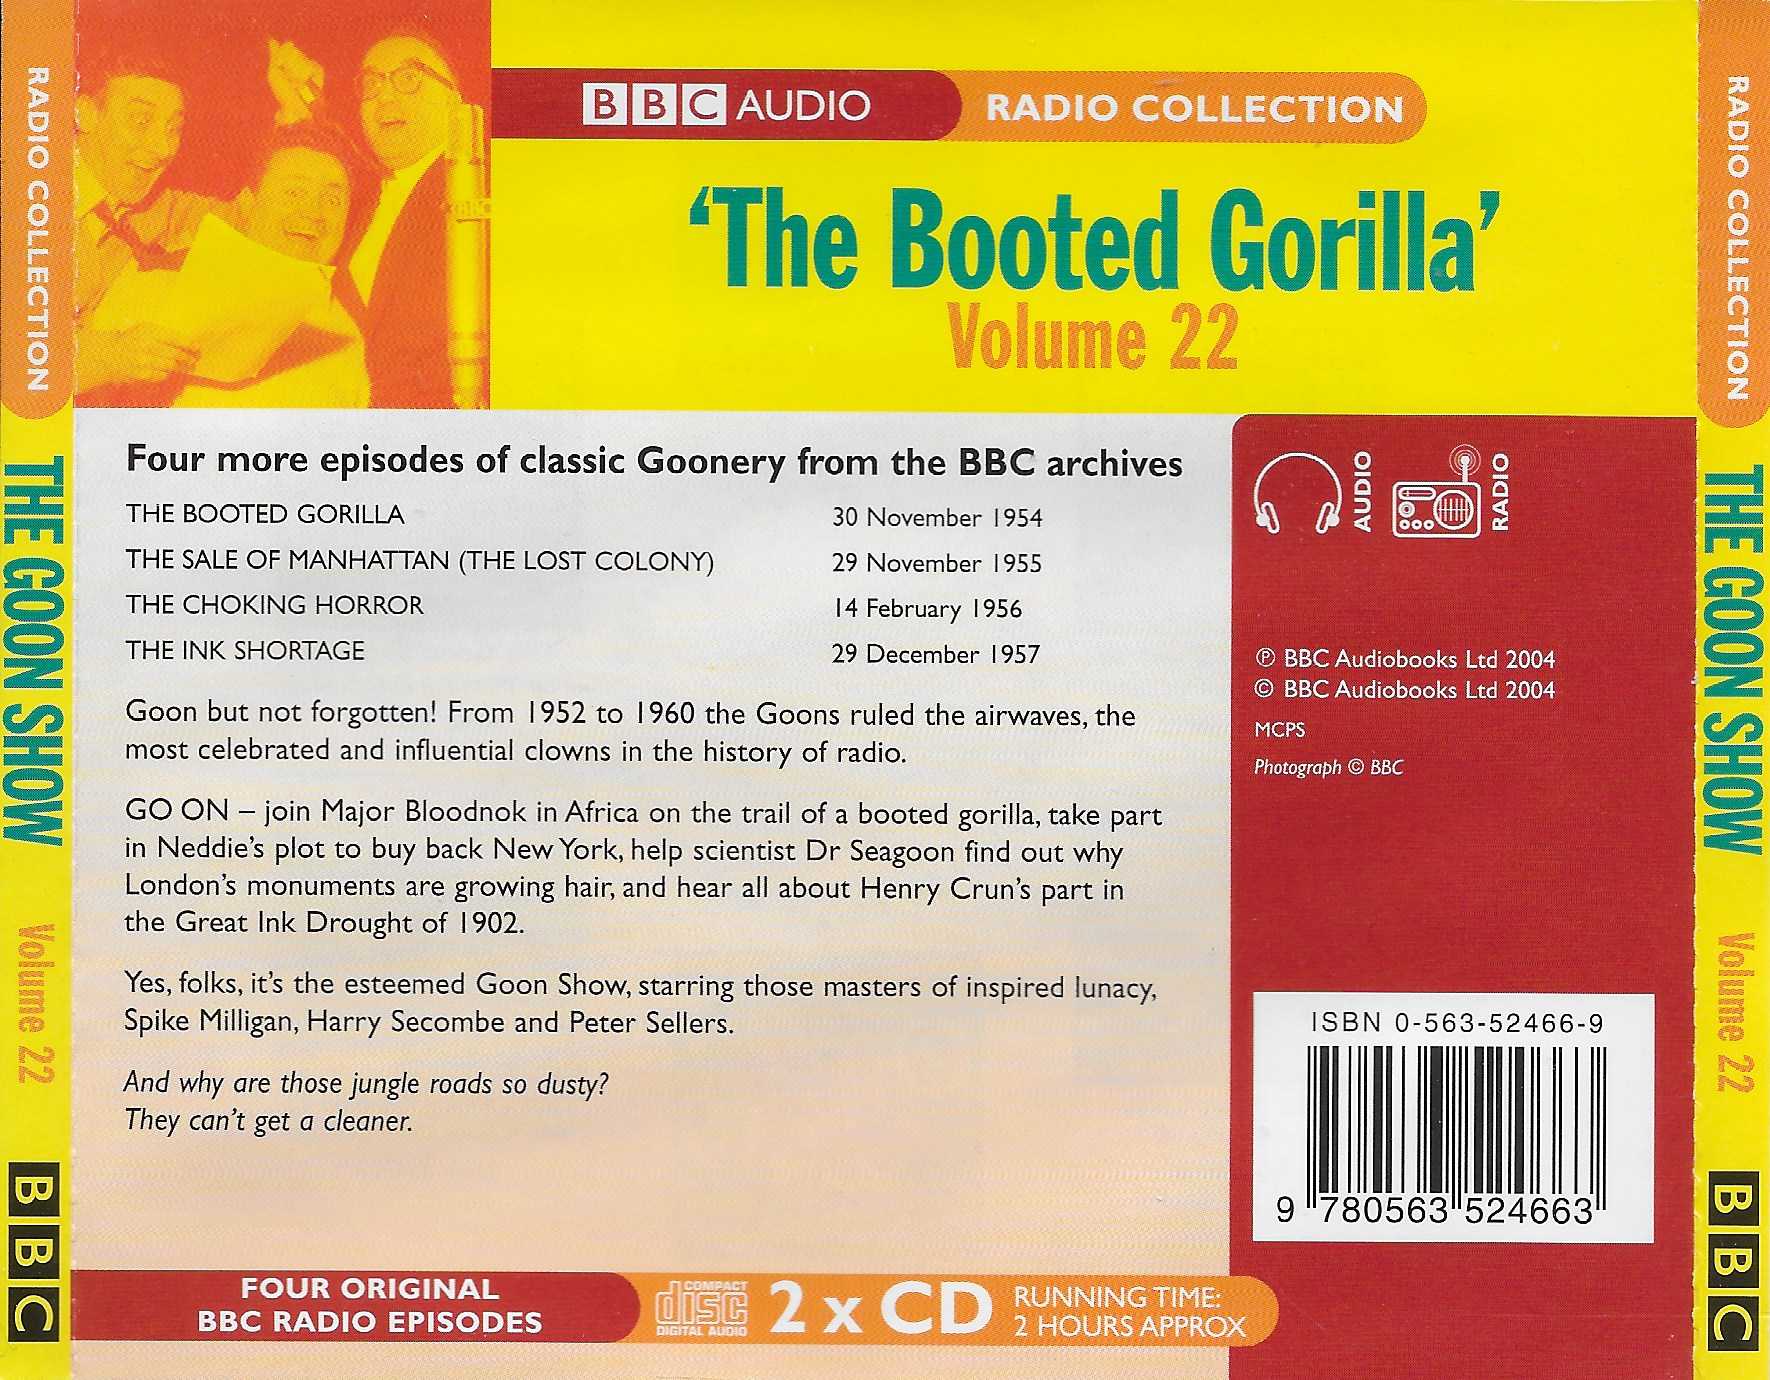 Picture of ISBN 0-563-52466-9 The Goon show 22 - The booted gorilla by artist Spike Milligan / Eric Sykes from the BBC records and Tapes library